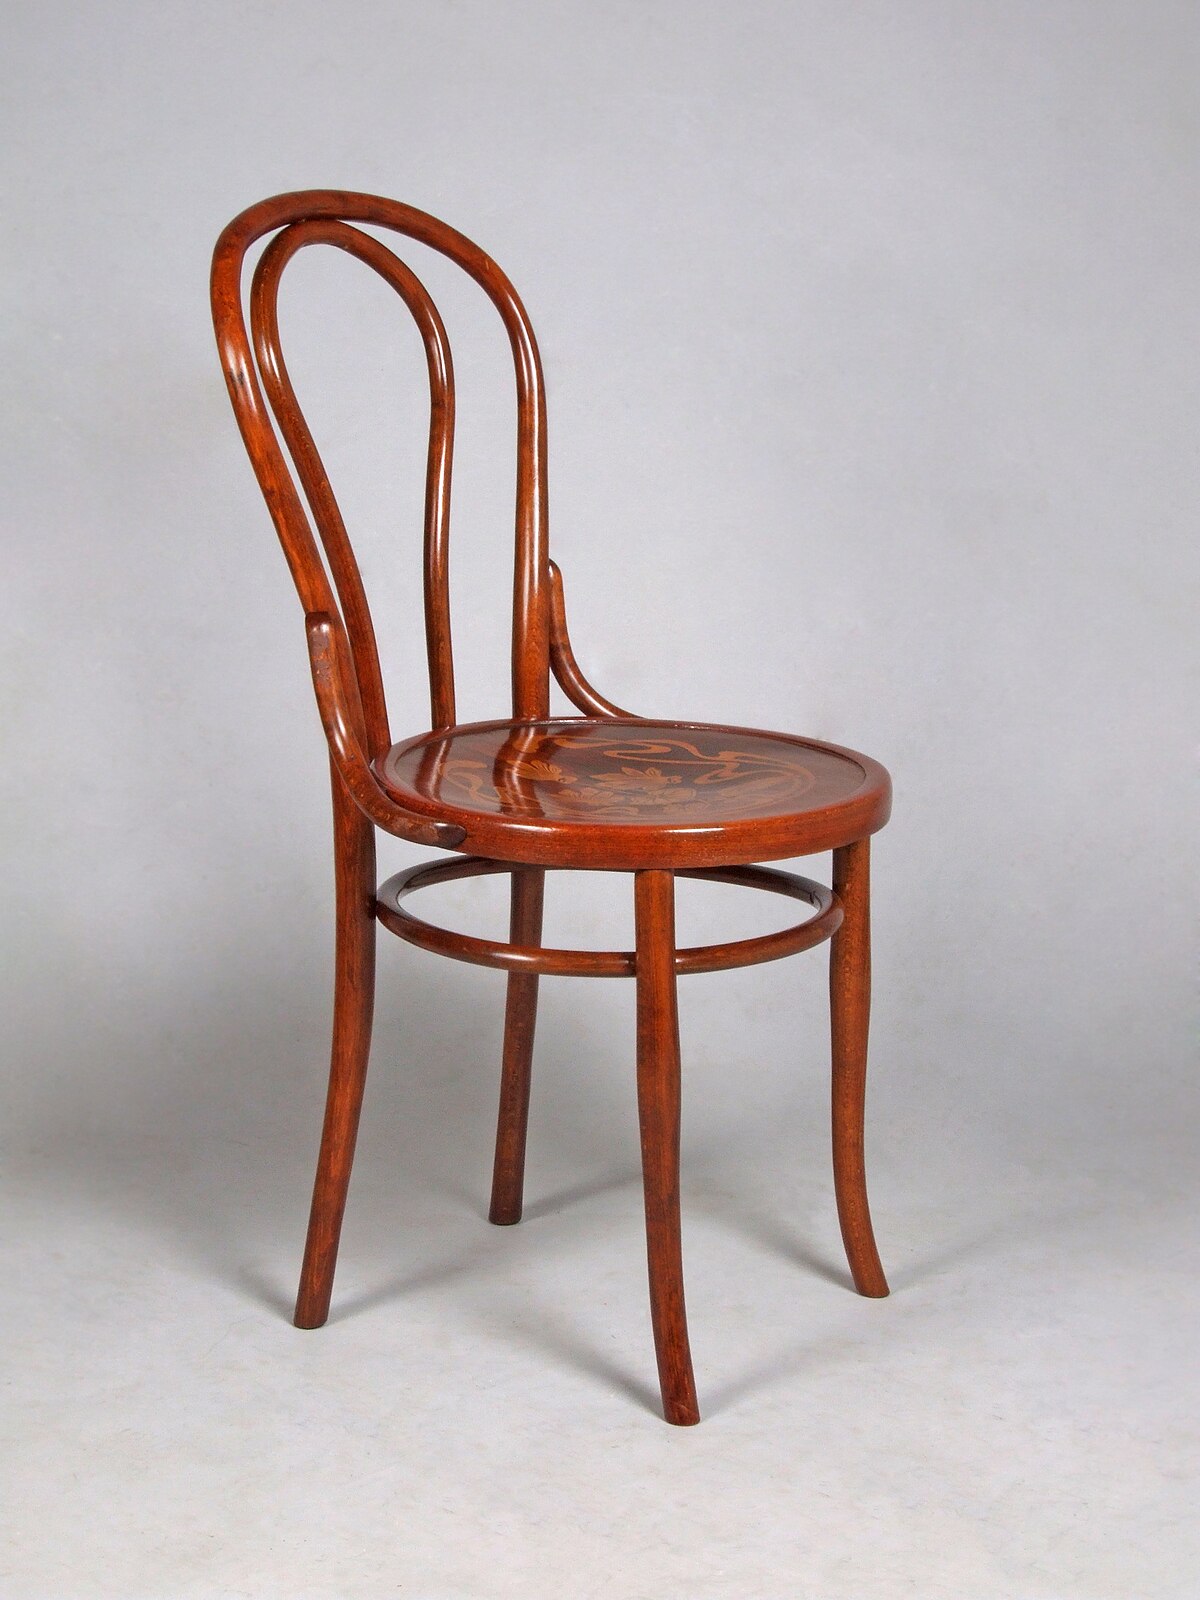 chair - Wiktionary